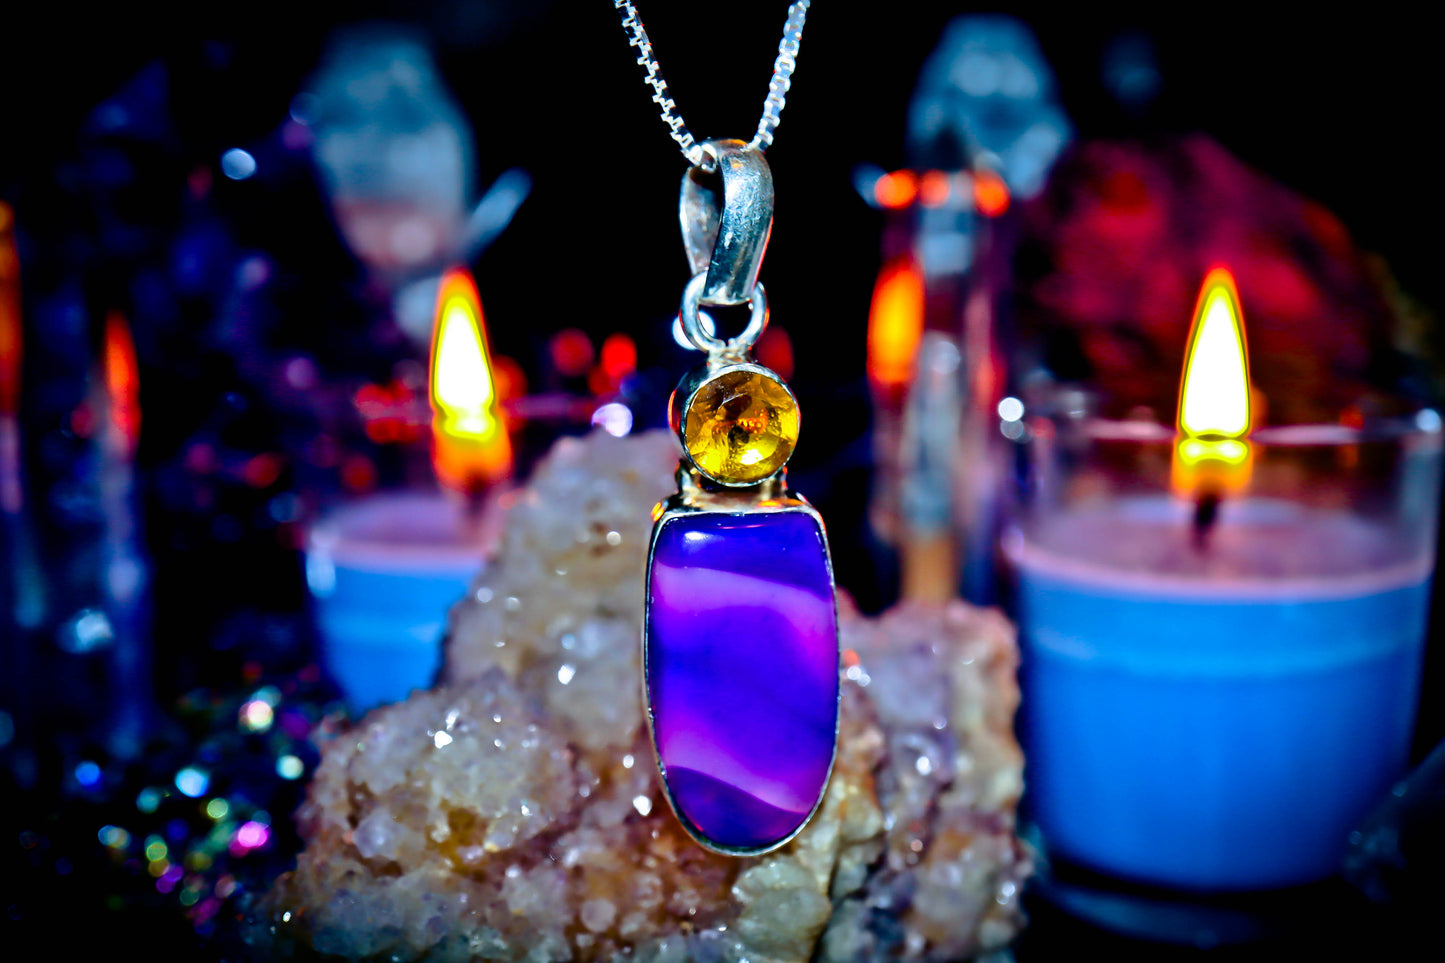 ** Psychic Ability ** SEE INTO THE FUTURE ~ 3rd Eye ESP Spell Genie Vessel! Powerful Spell! Premonition! Psychic Intuition! See All! Sacred Casting! **POWERFUL** Sterling Silver!